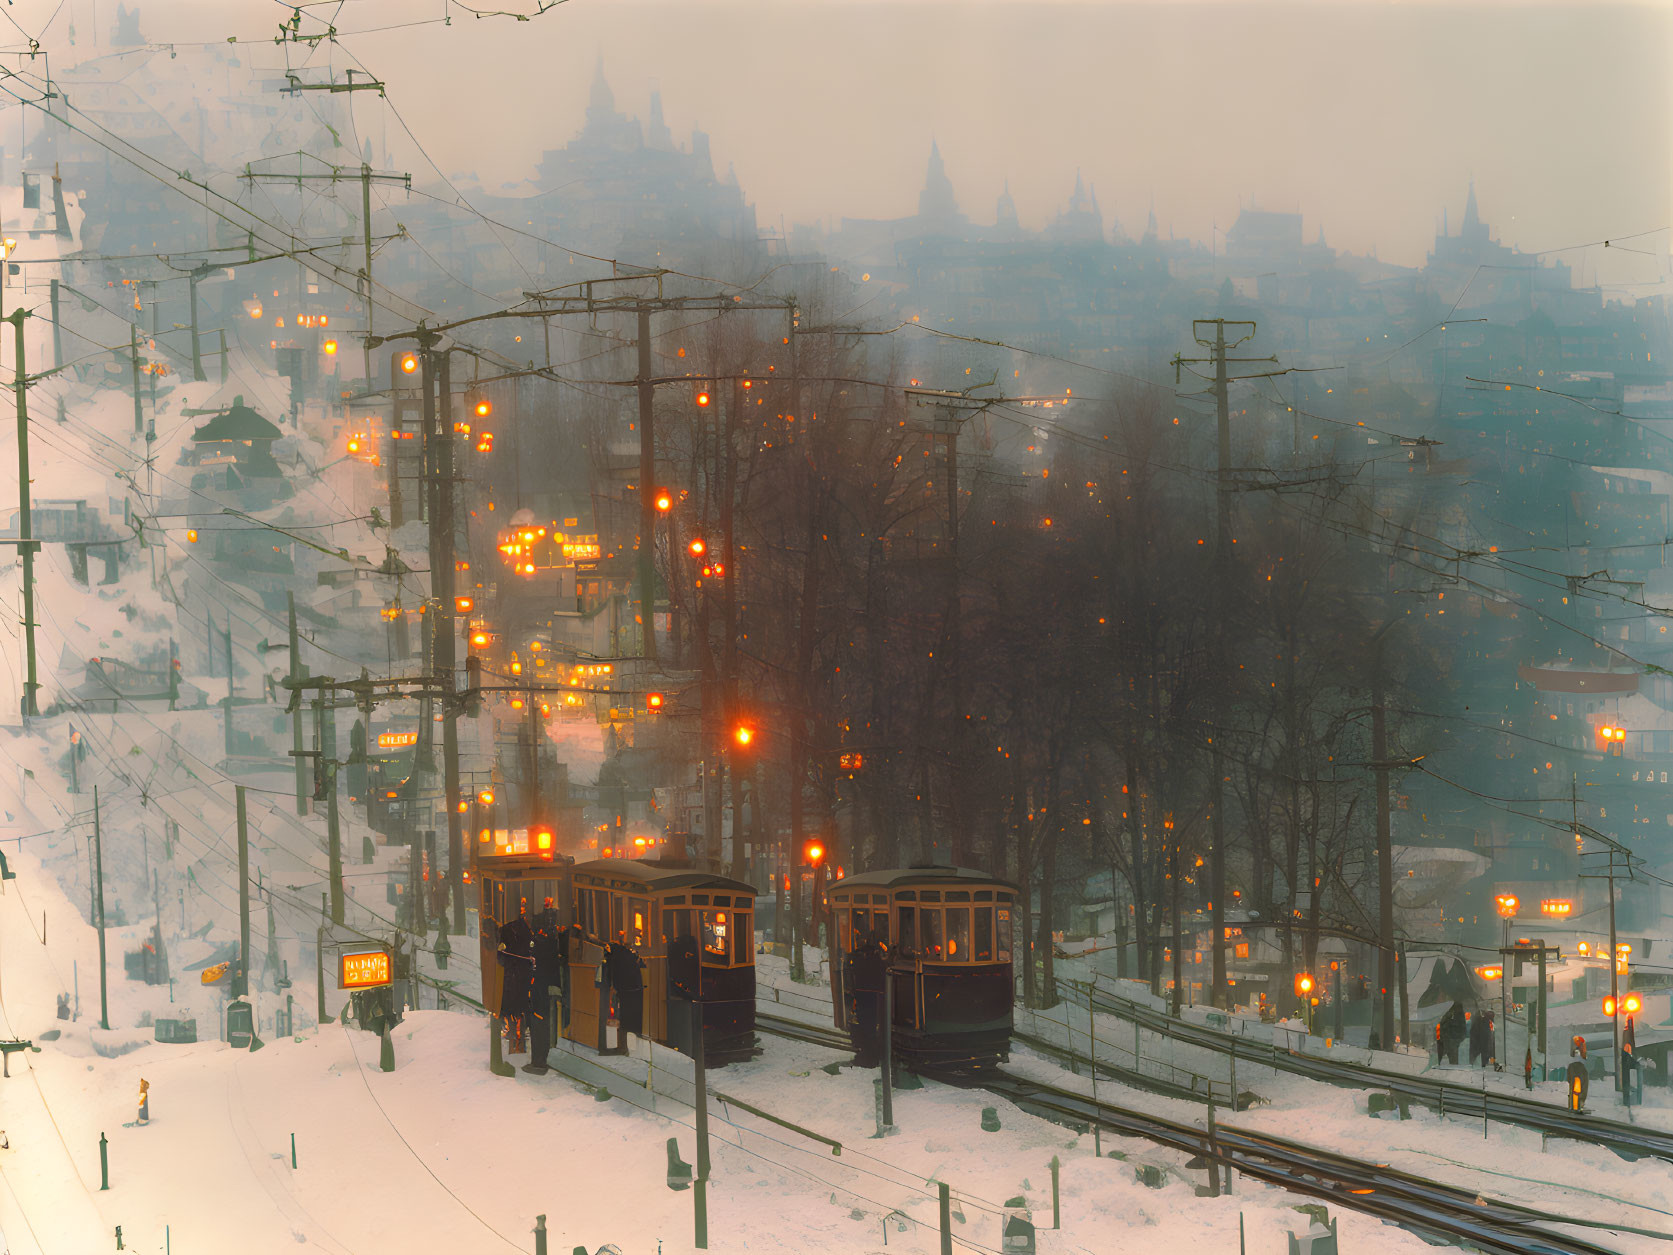 Snow-covered vintage trams in twilight city fog with warm glowing lights